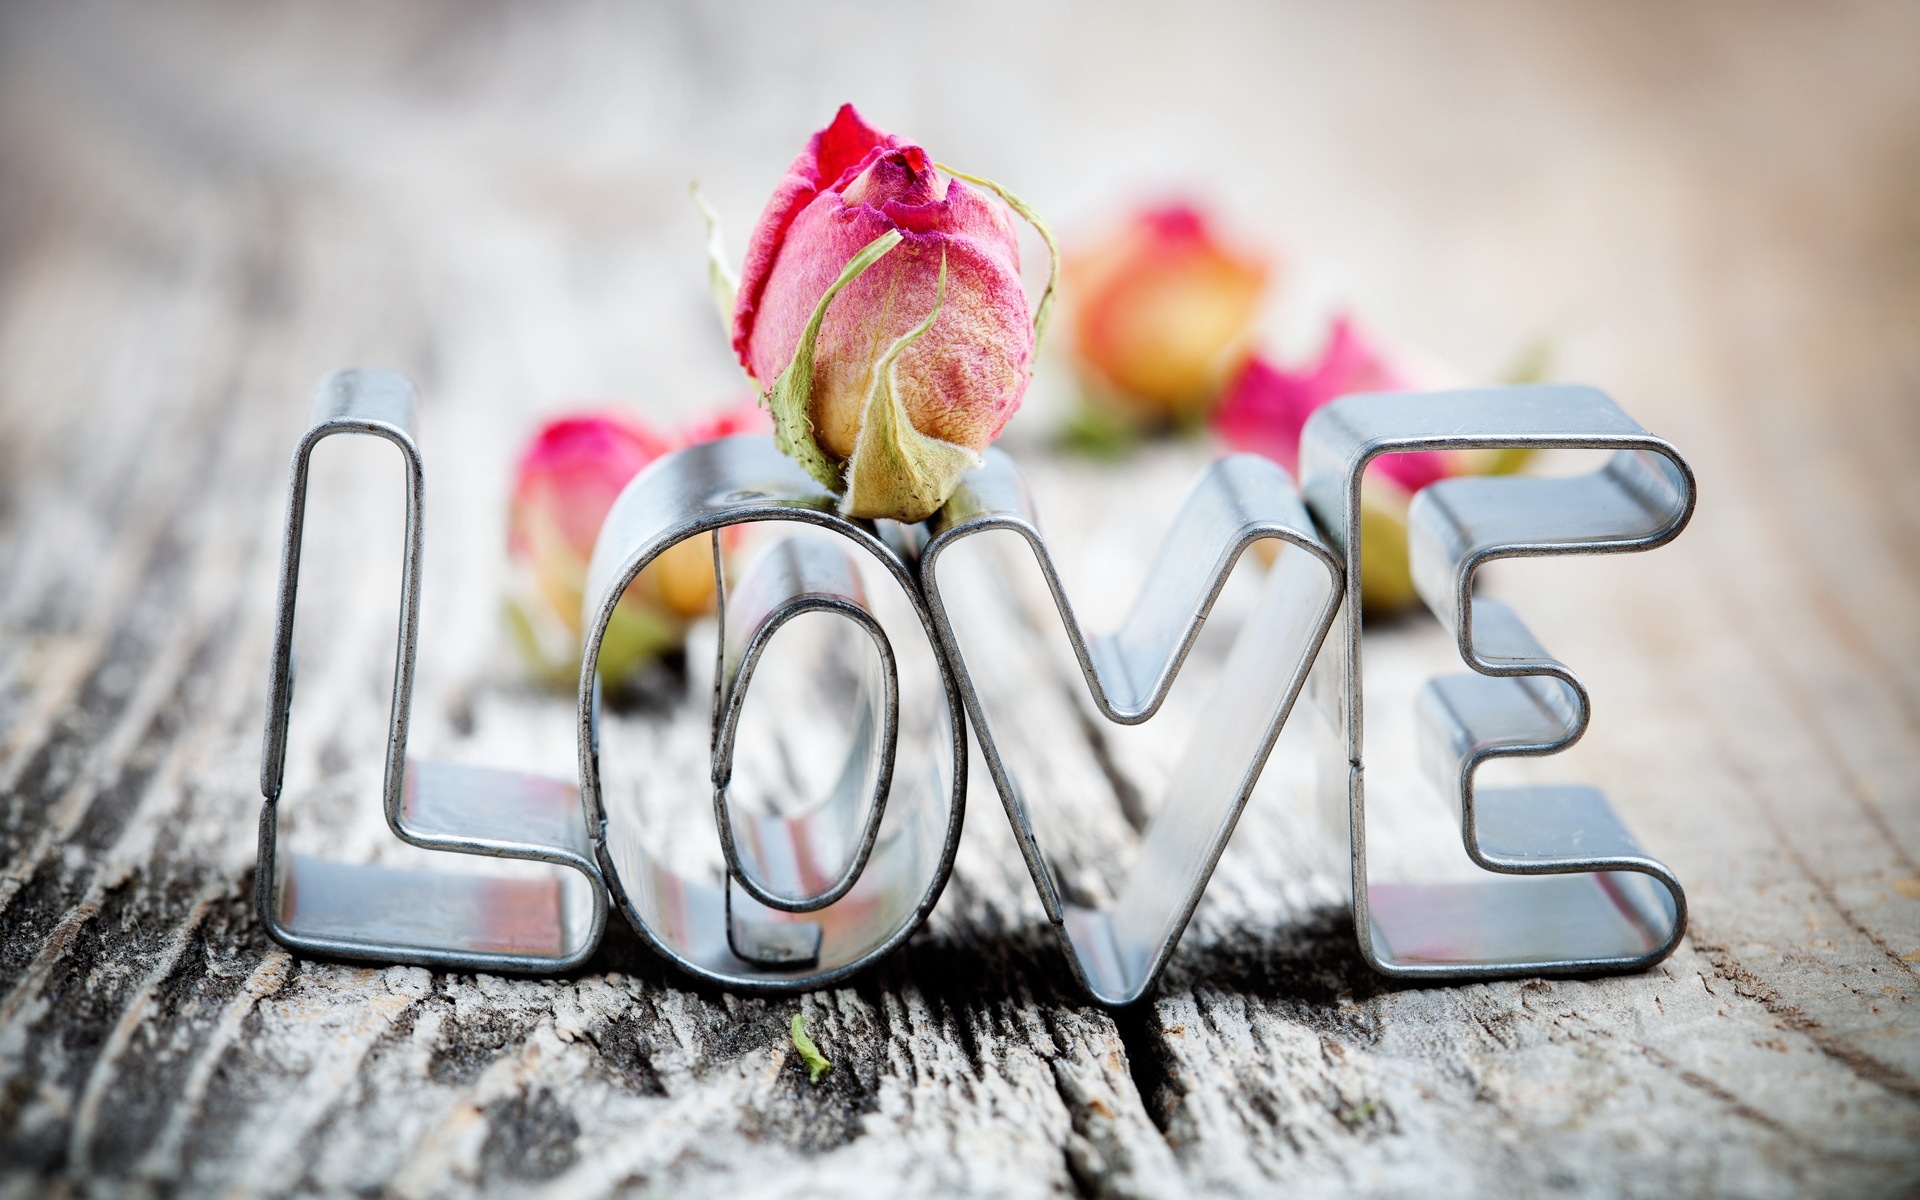 Warm and romantic Valentine's Day HD wallpapers #1 - 1920x1200